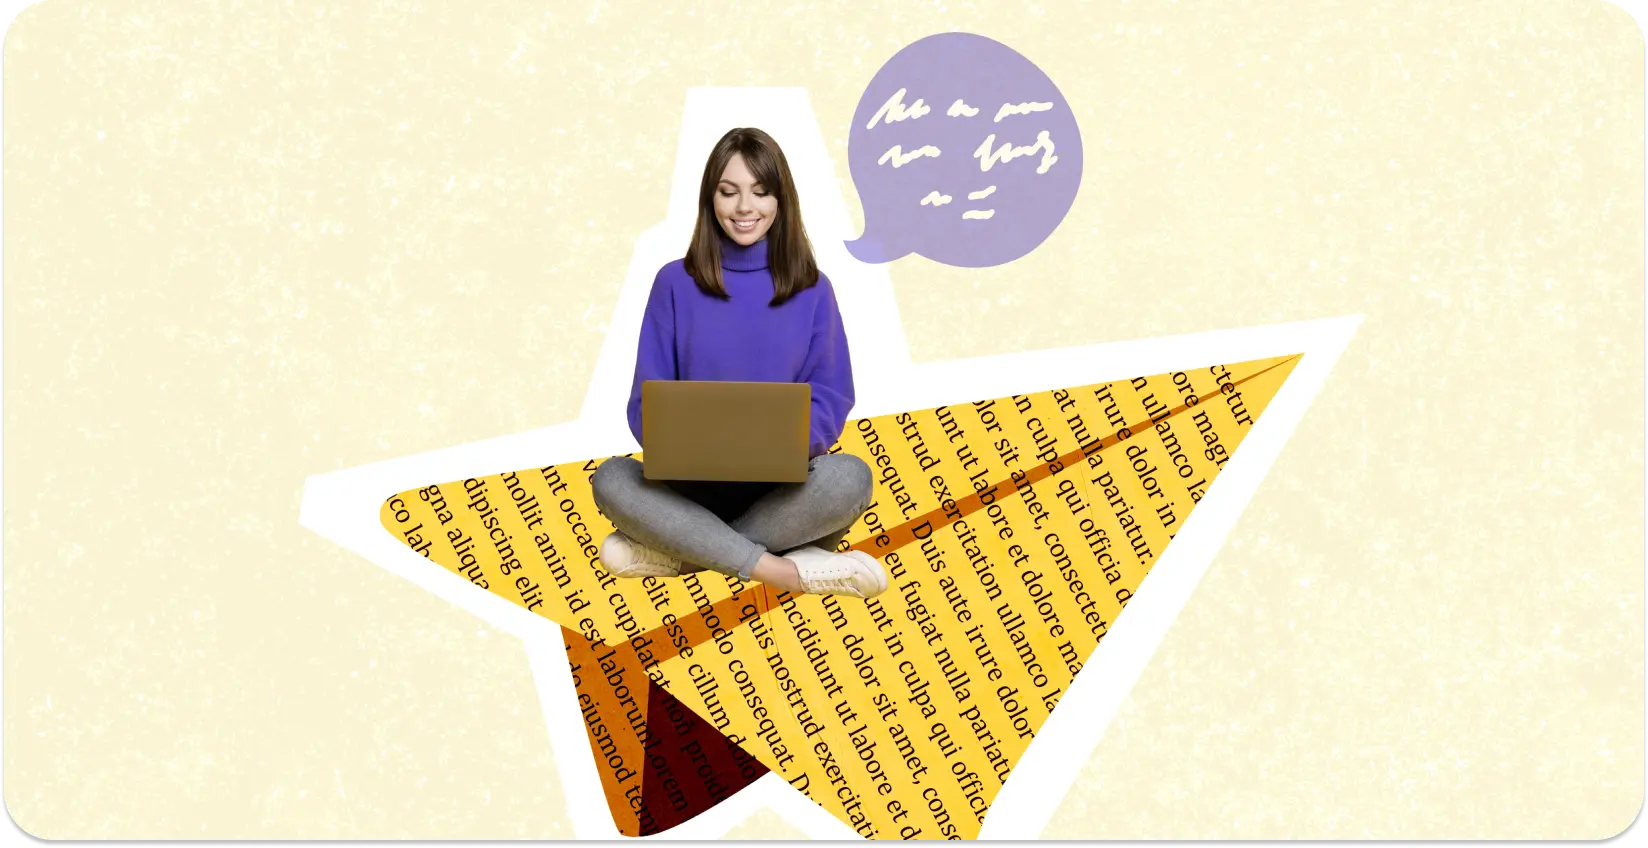 A writer sits on a star-shaped collage of text-filled pages with a laptop.